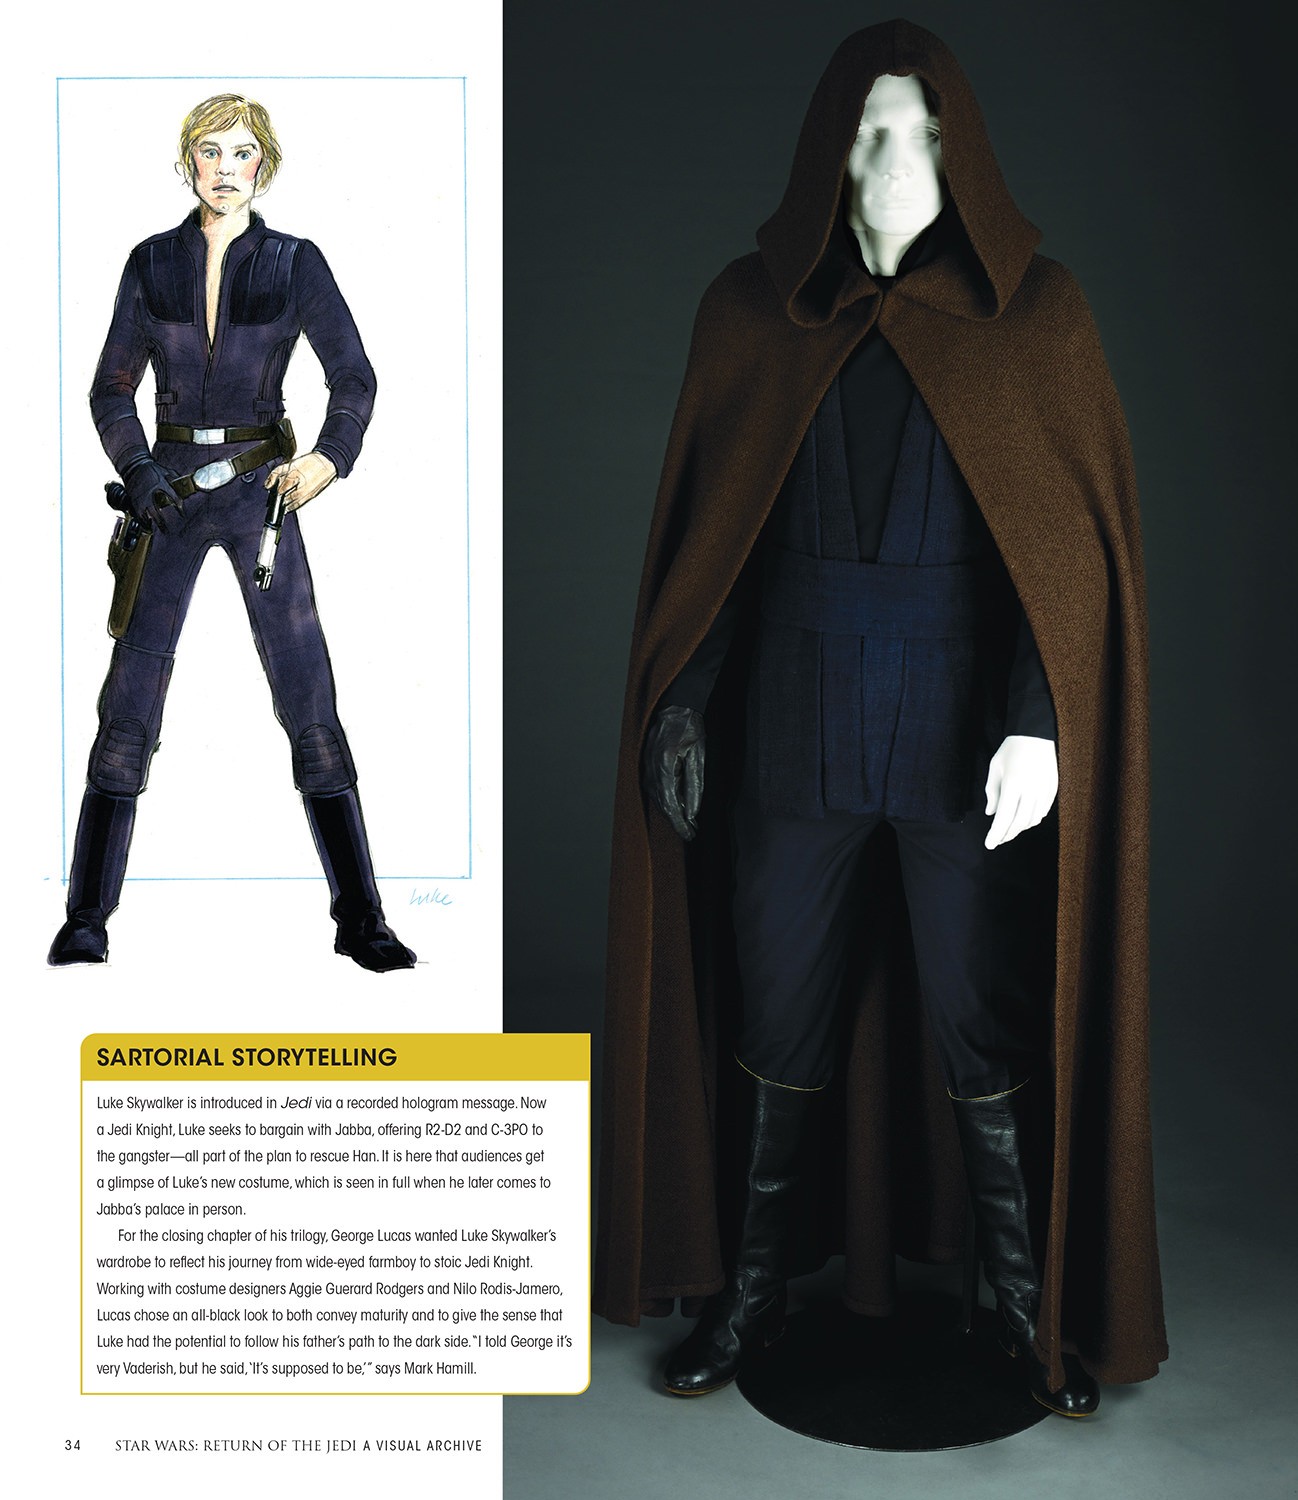 Star Wars: Return of the Jedi: A Visual Archive (Prototype Shown) View 2